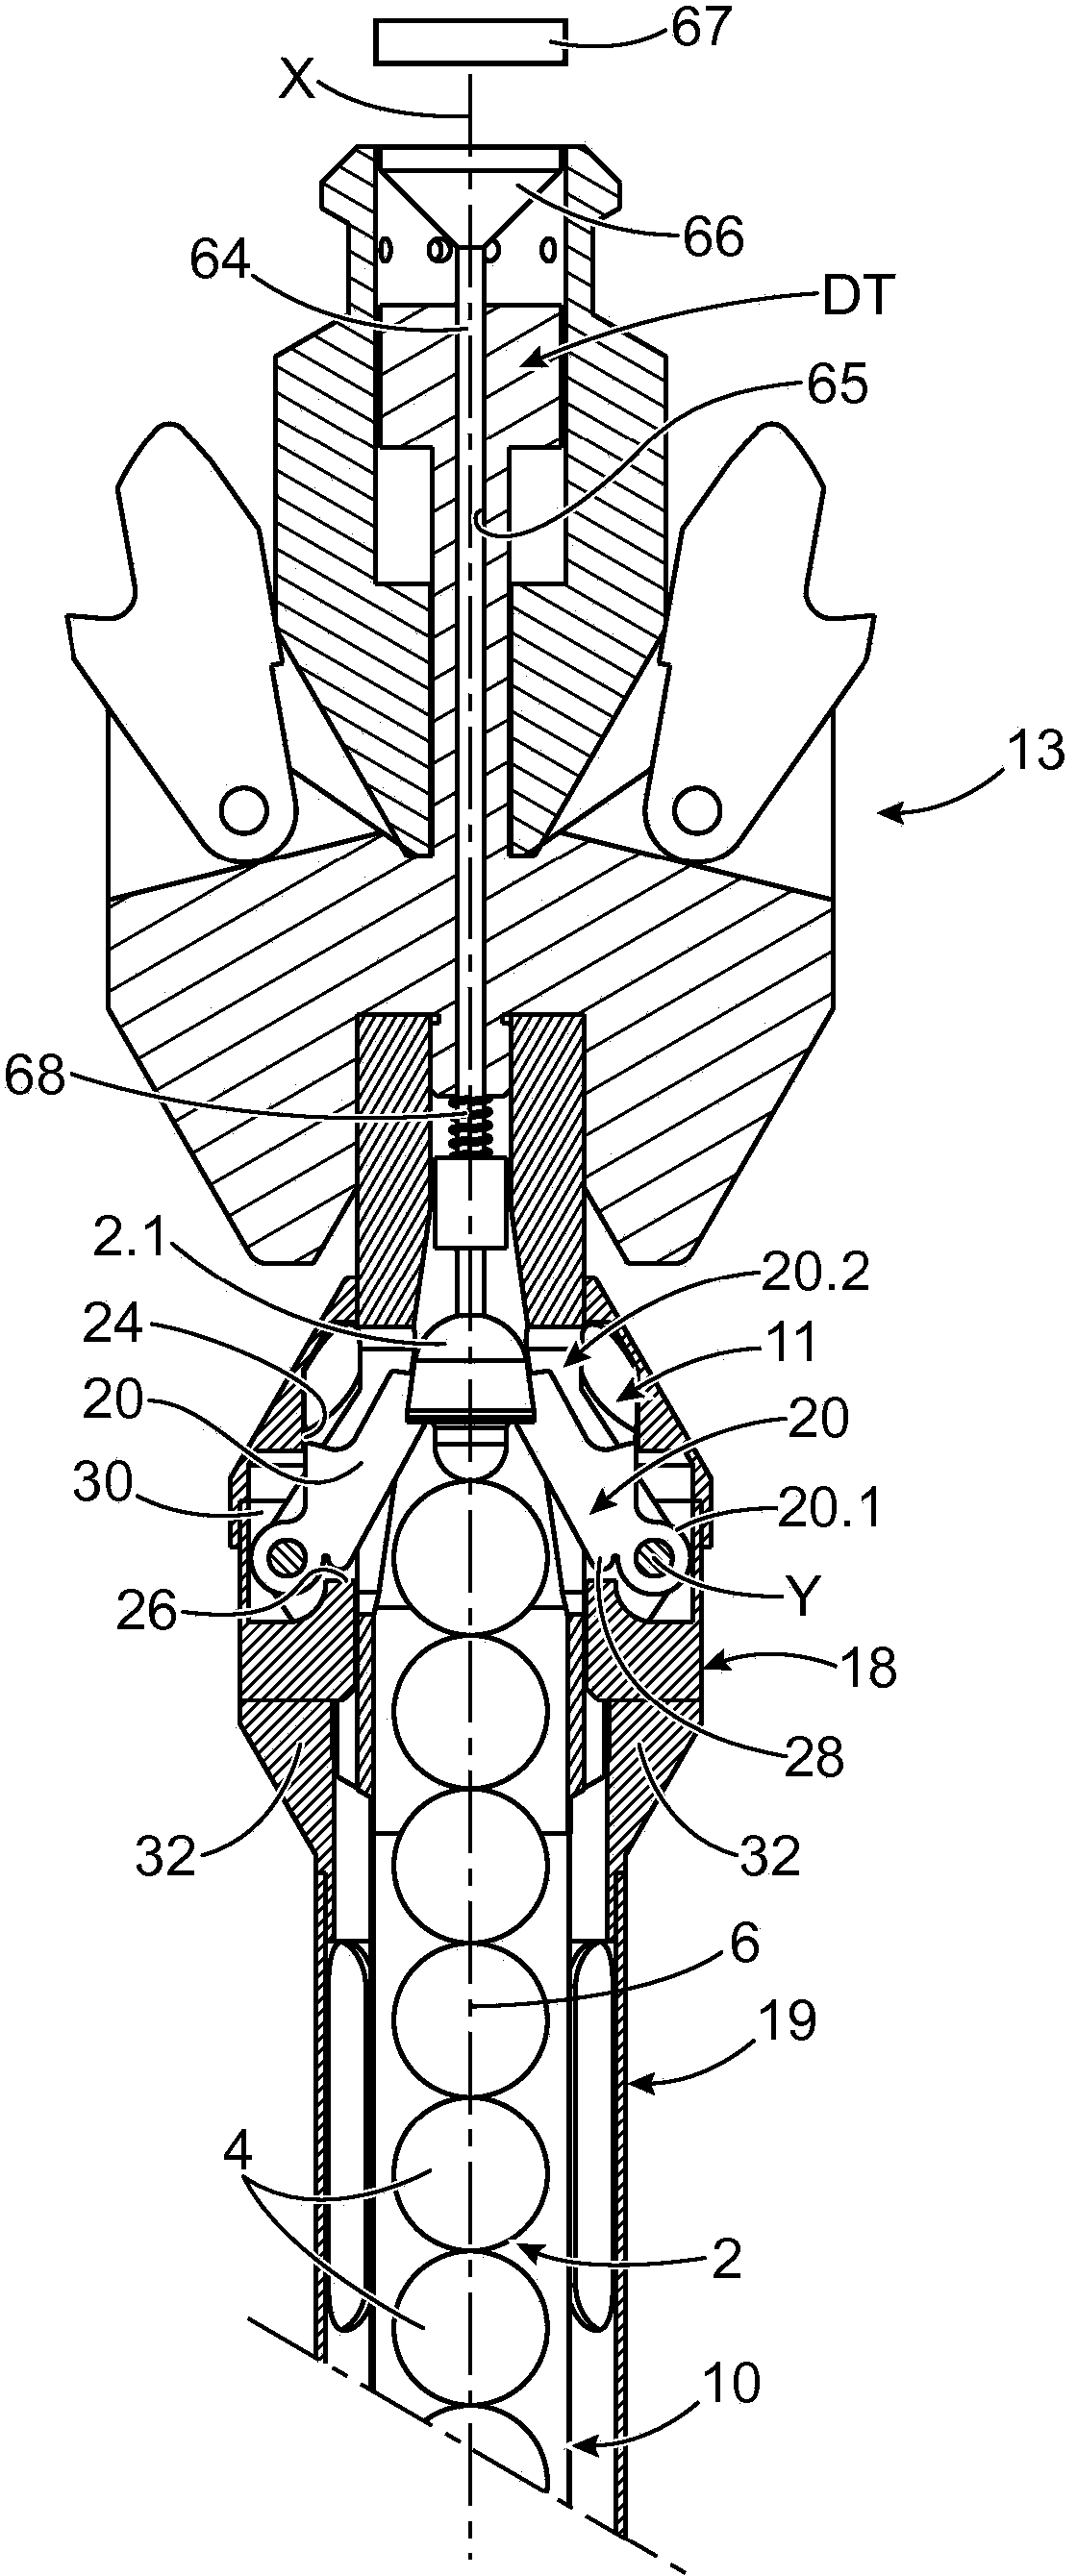 Device for triggering and inserting absorbing members and/or mitigators in fissile area of nuclear reactor and nuclear fuel assembly comprising the device